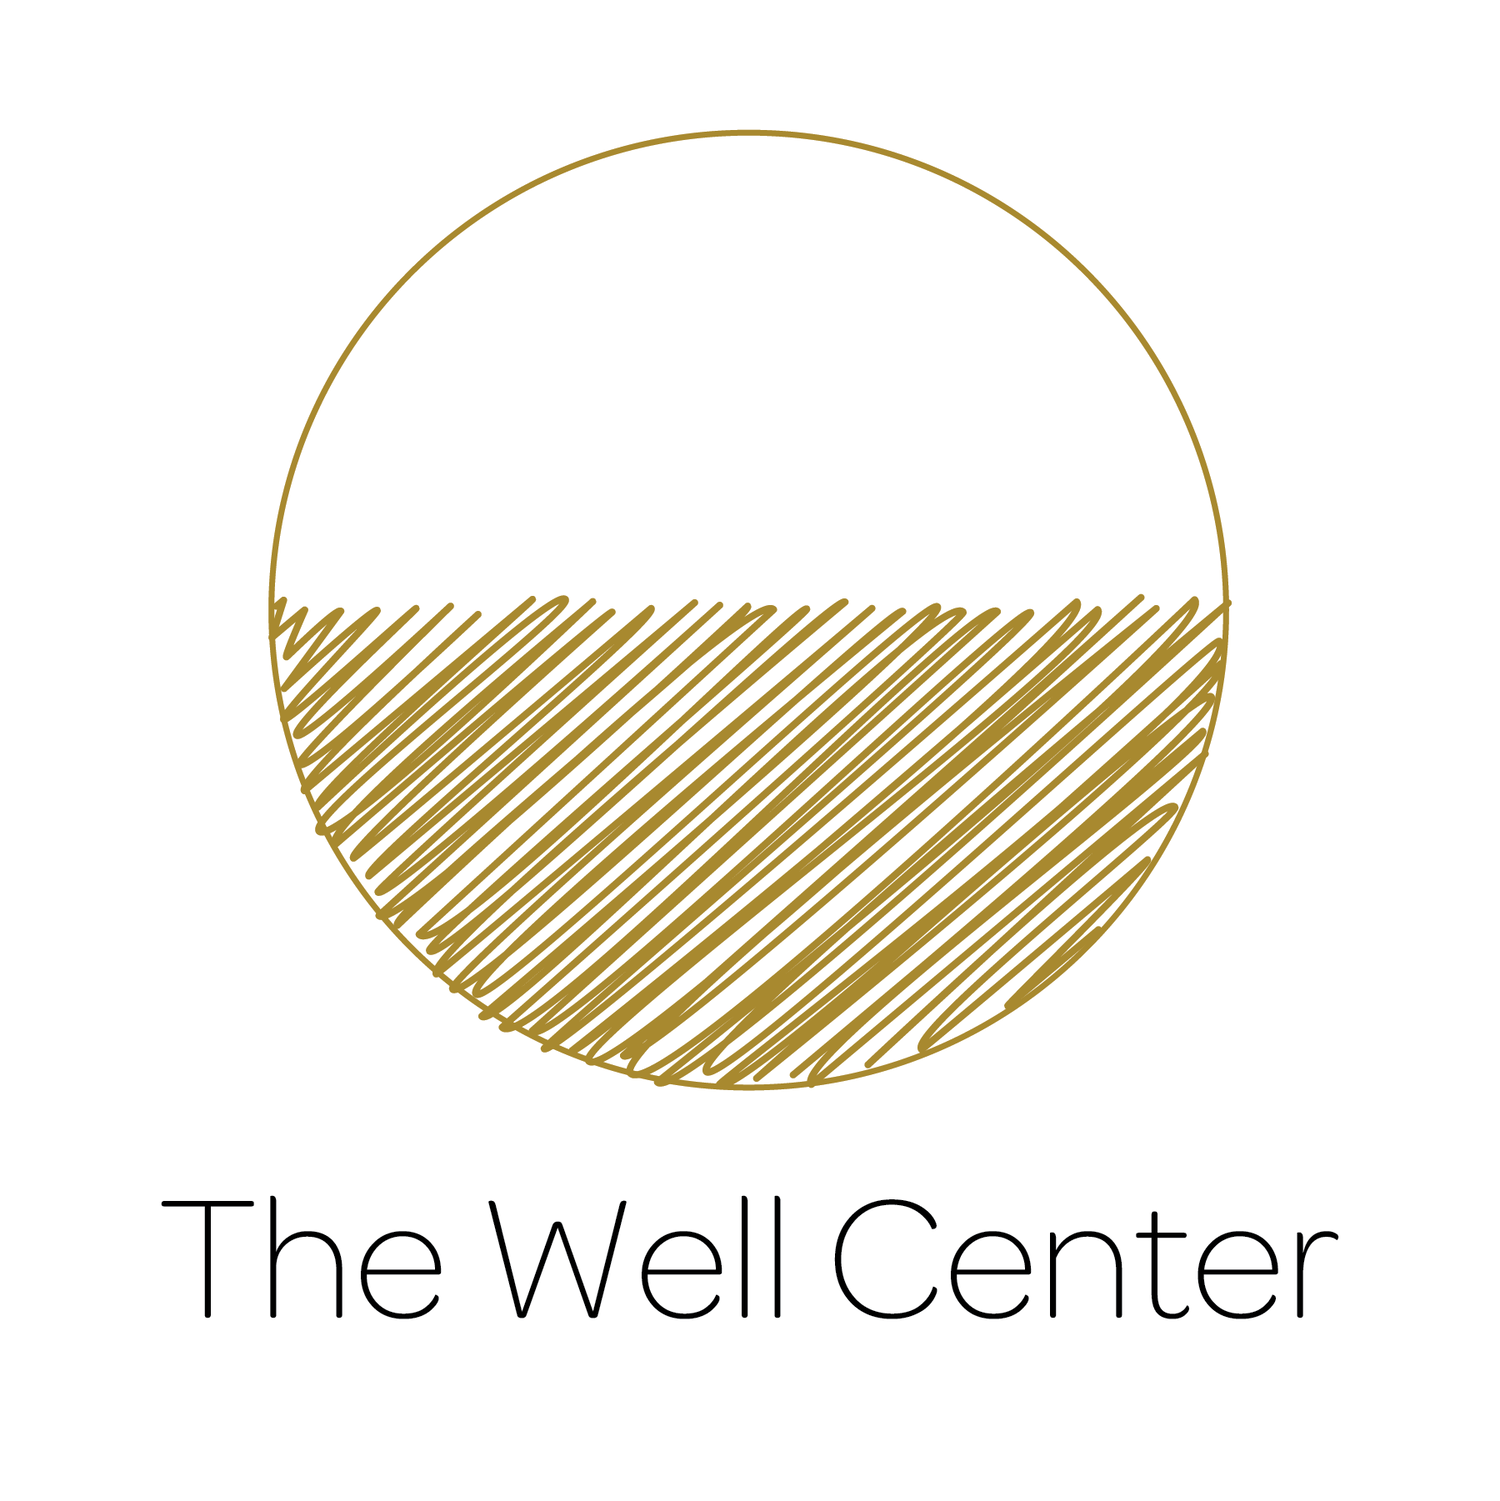 The Well Center